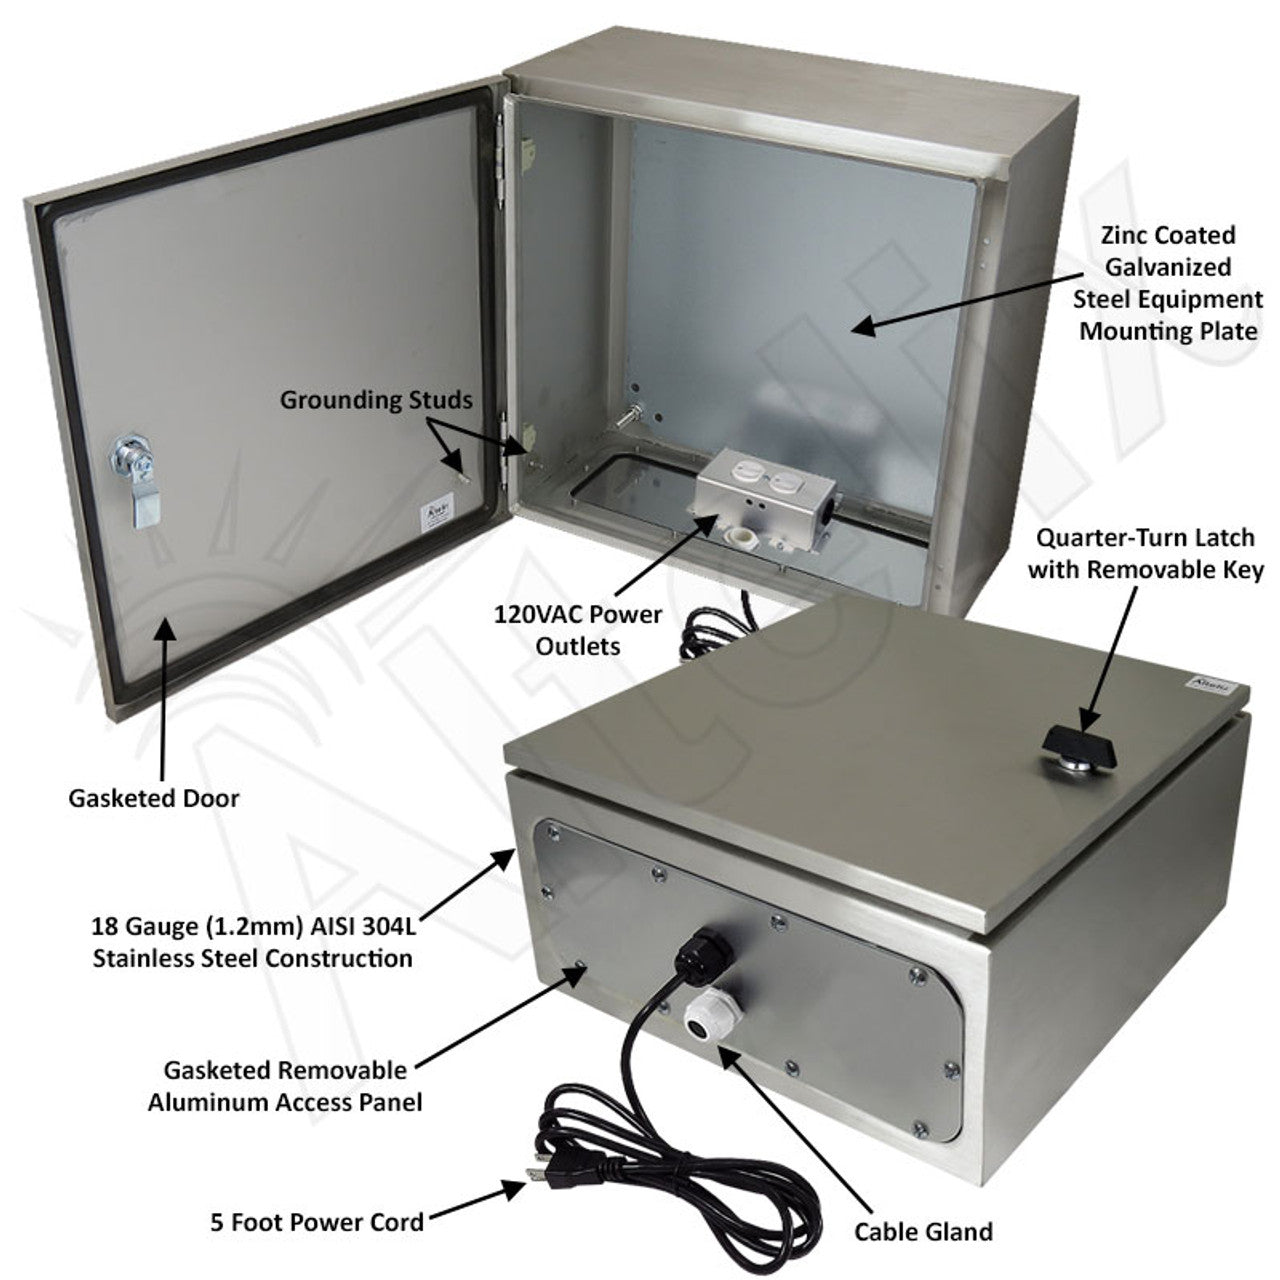 Altelix NEMA 4X Stainless Steel Weatherproof Enclosure with 120 VAC Outlets and Power Cord - 0